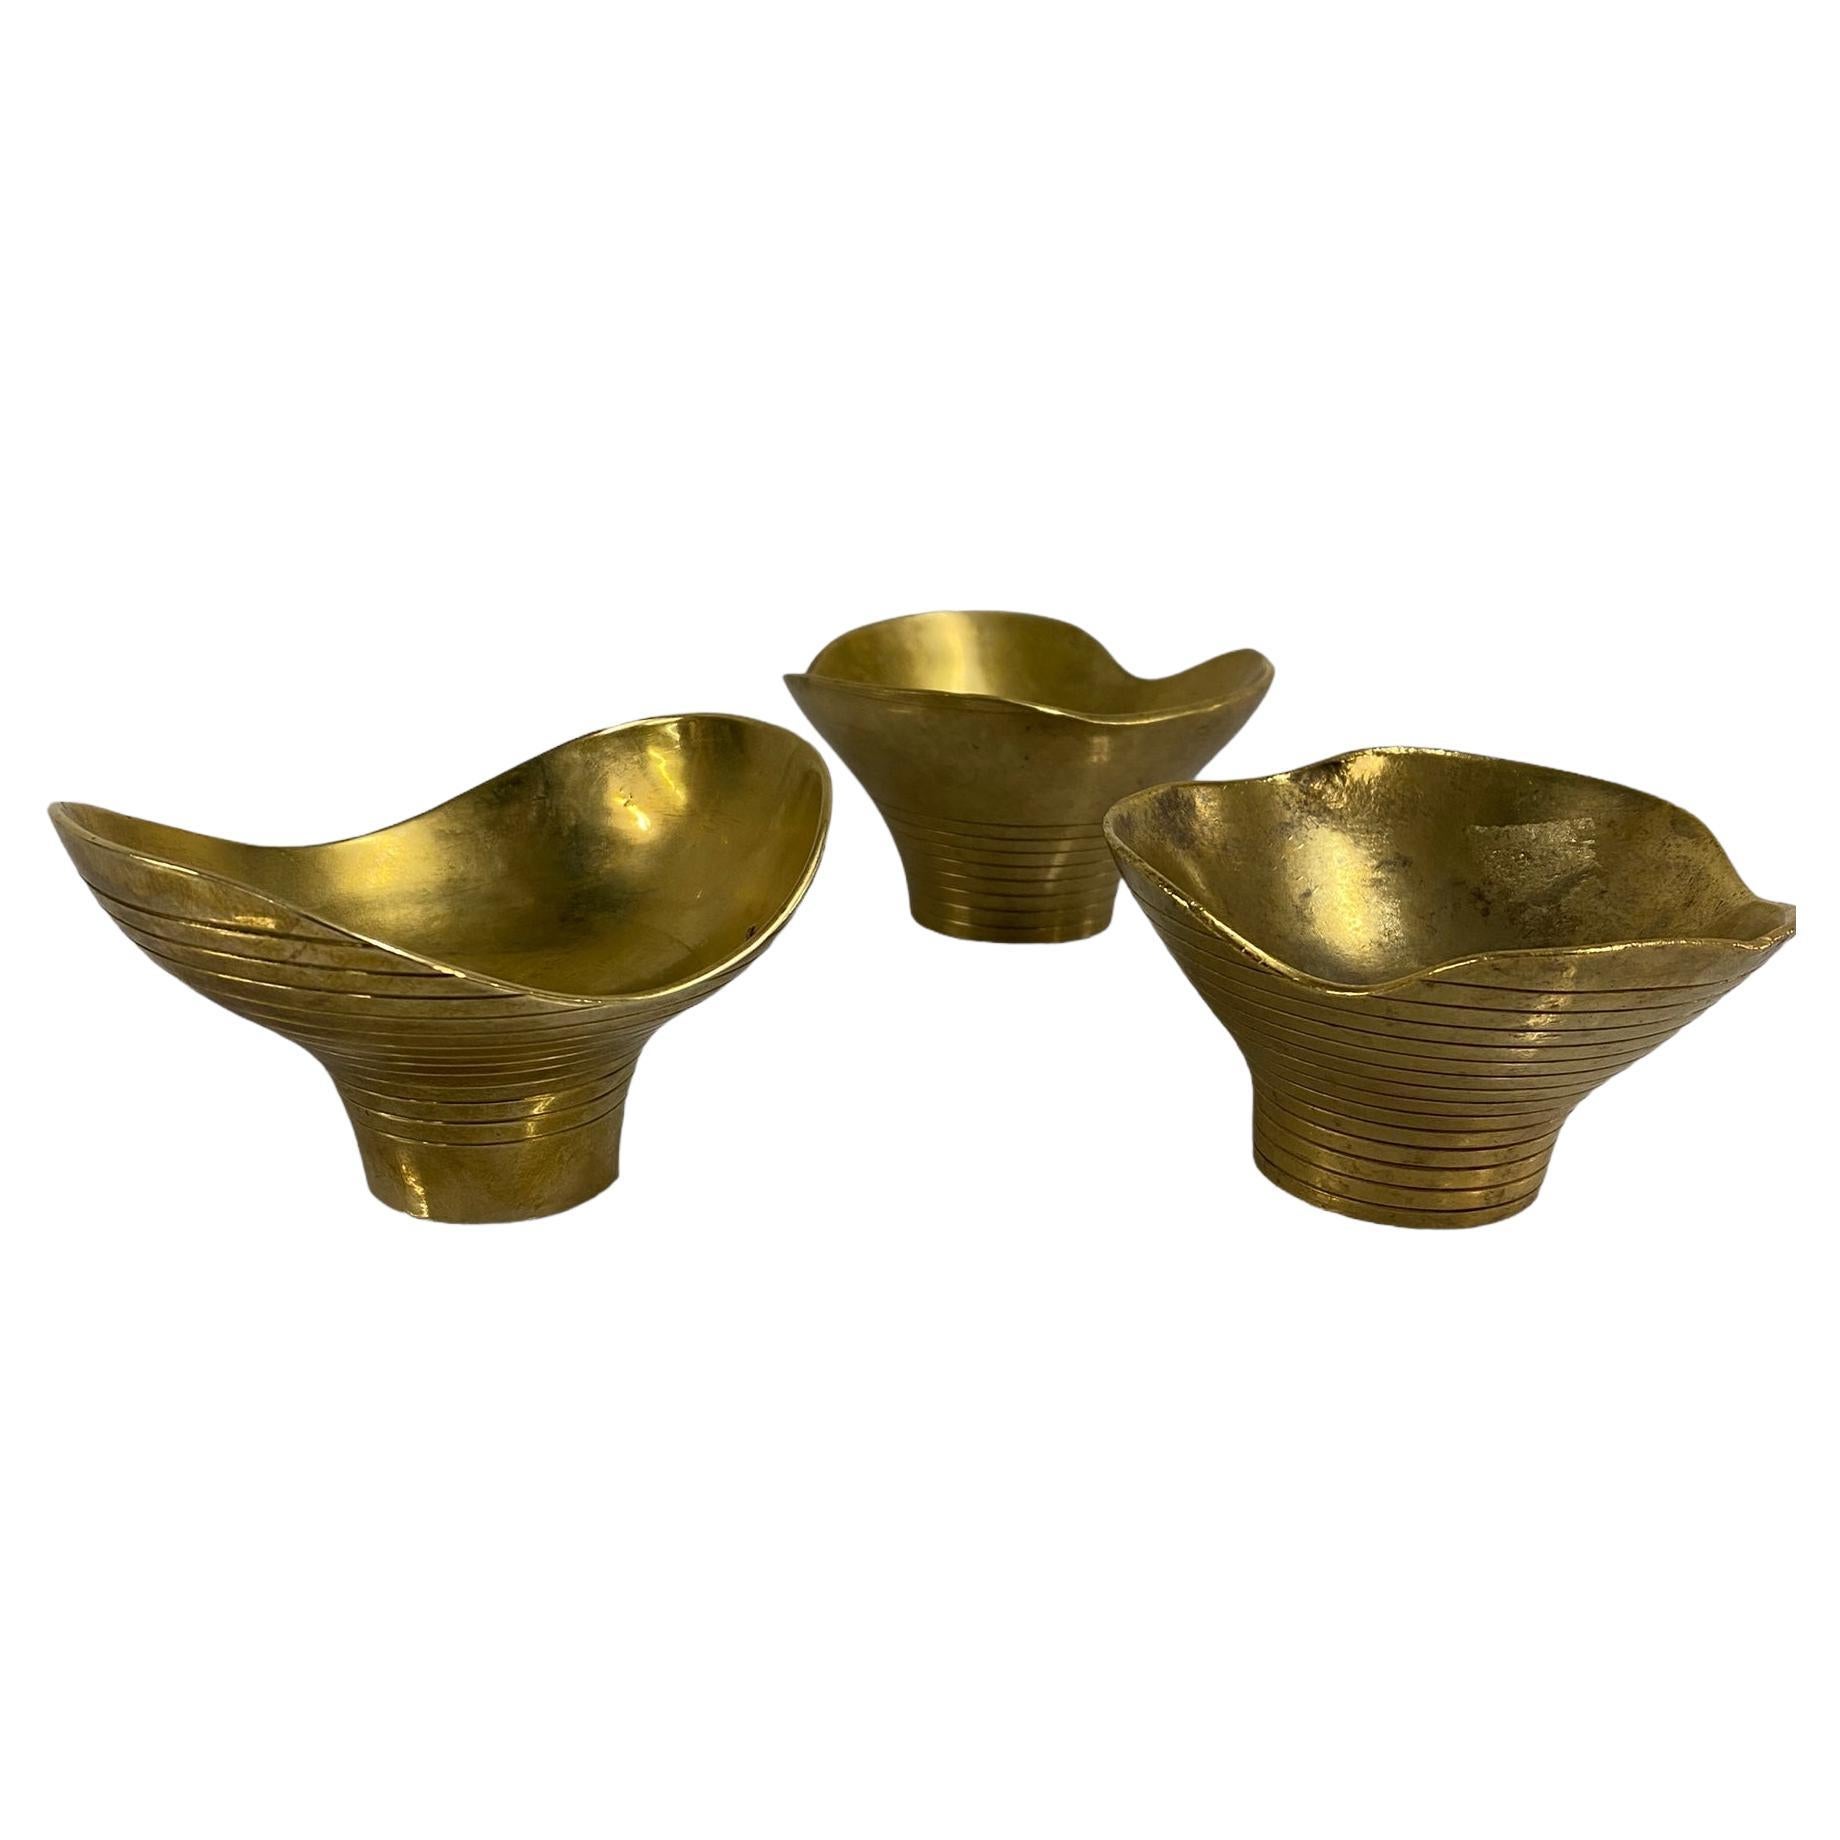 A Set of 3 Paavo & Helena Tynell Brass Bowl no. 4, Taito 1940s For Sale